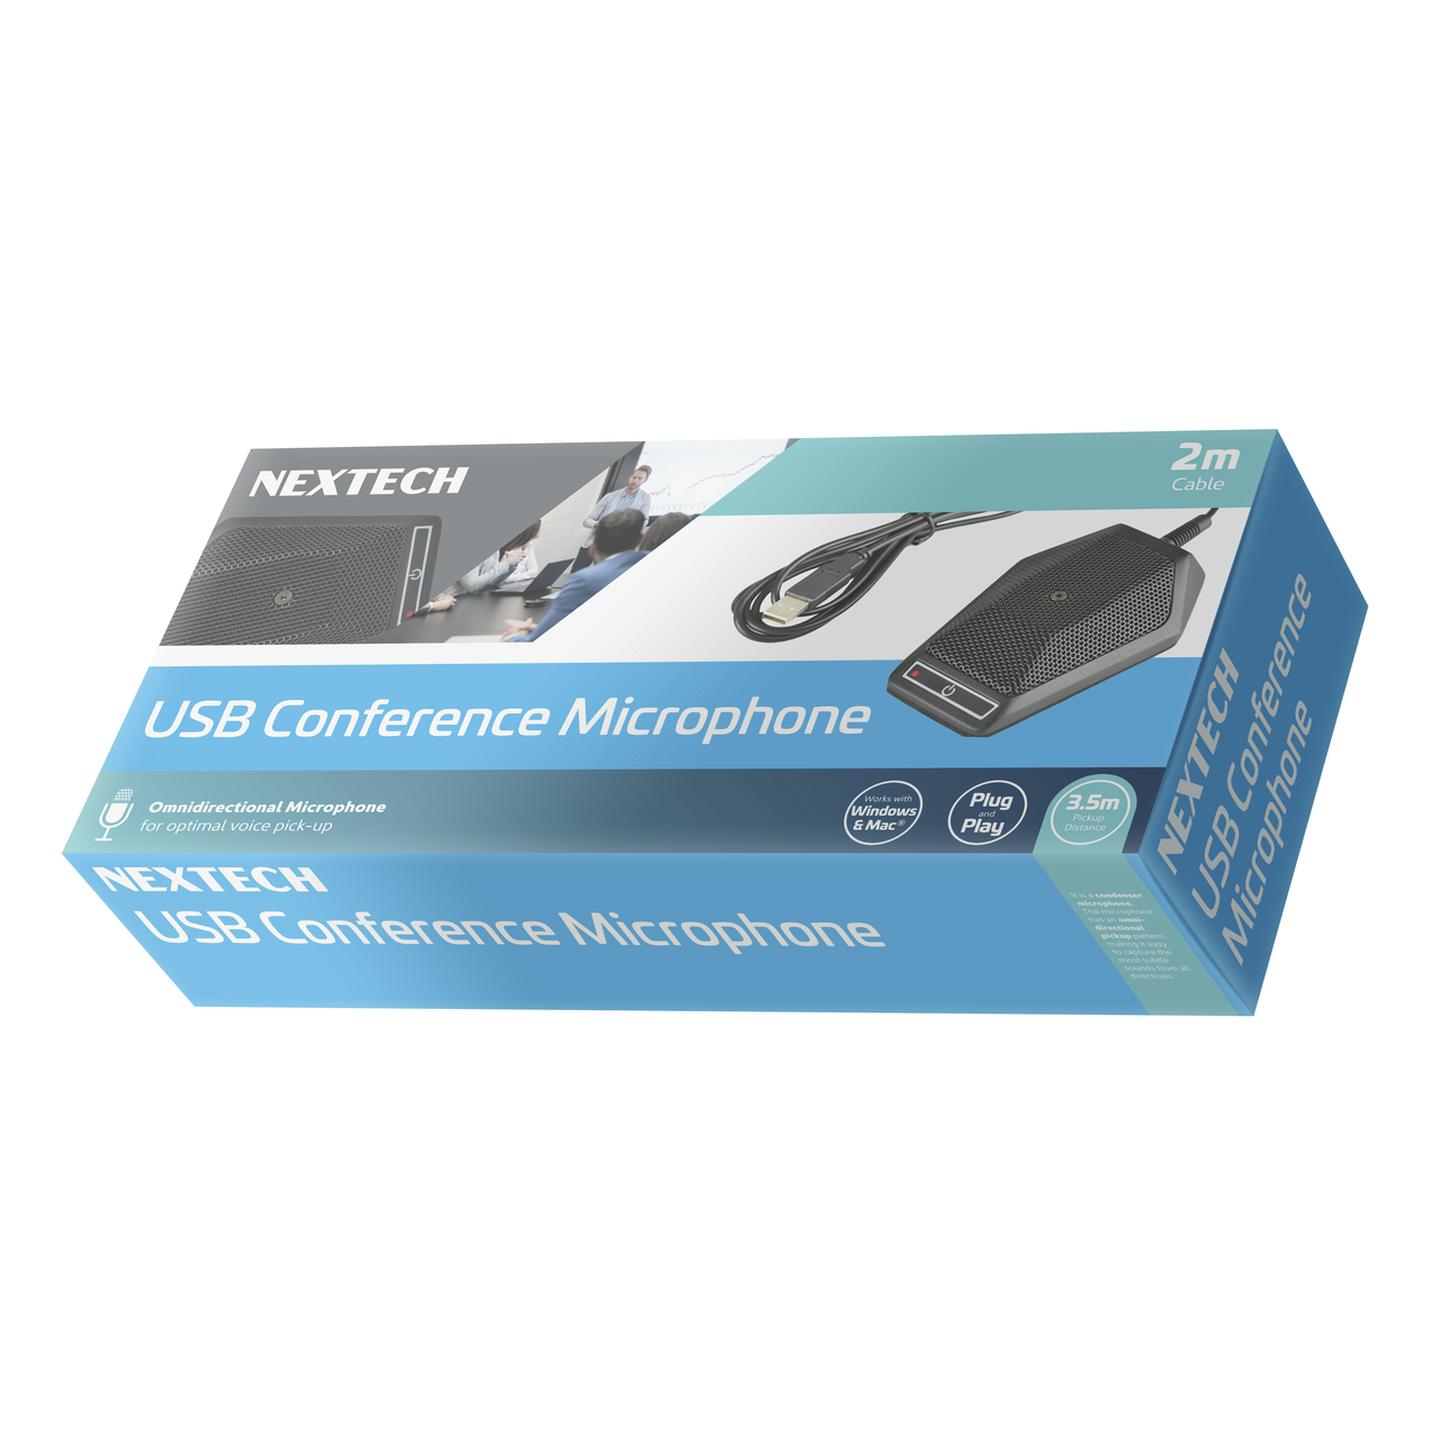 Nextexh USB Conference Microphone